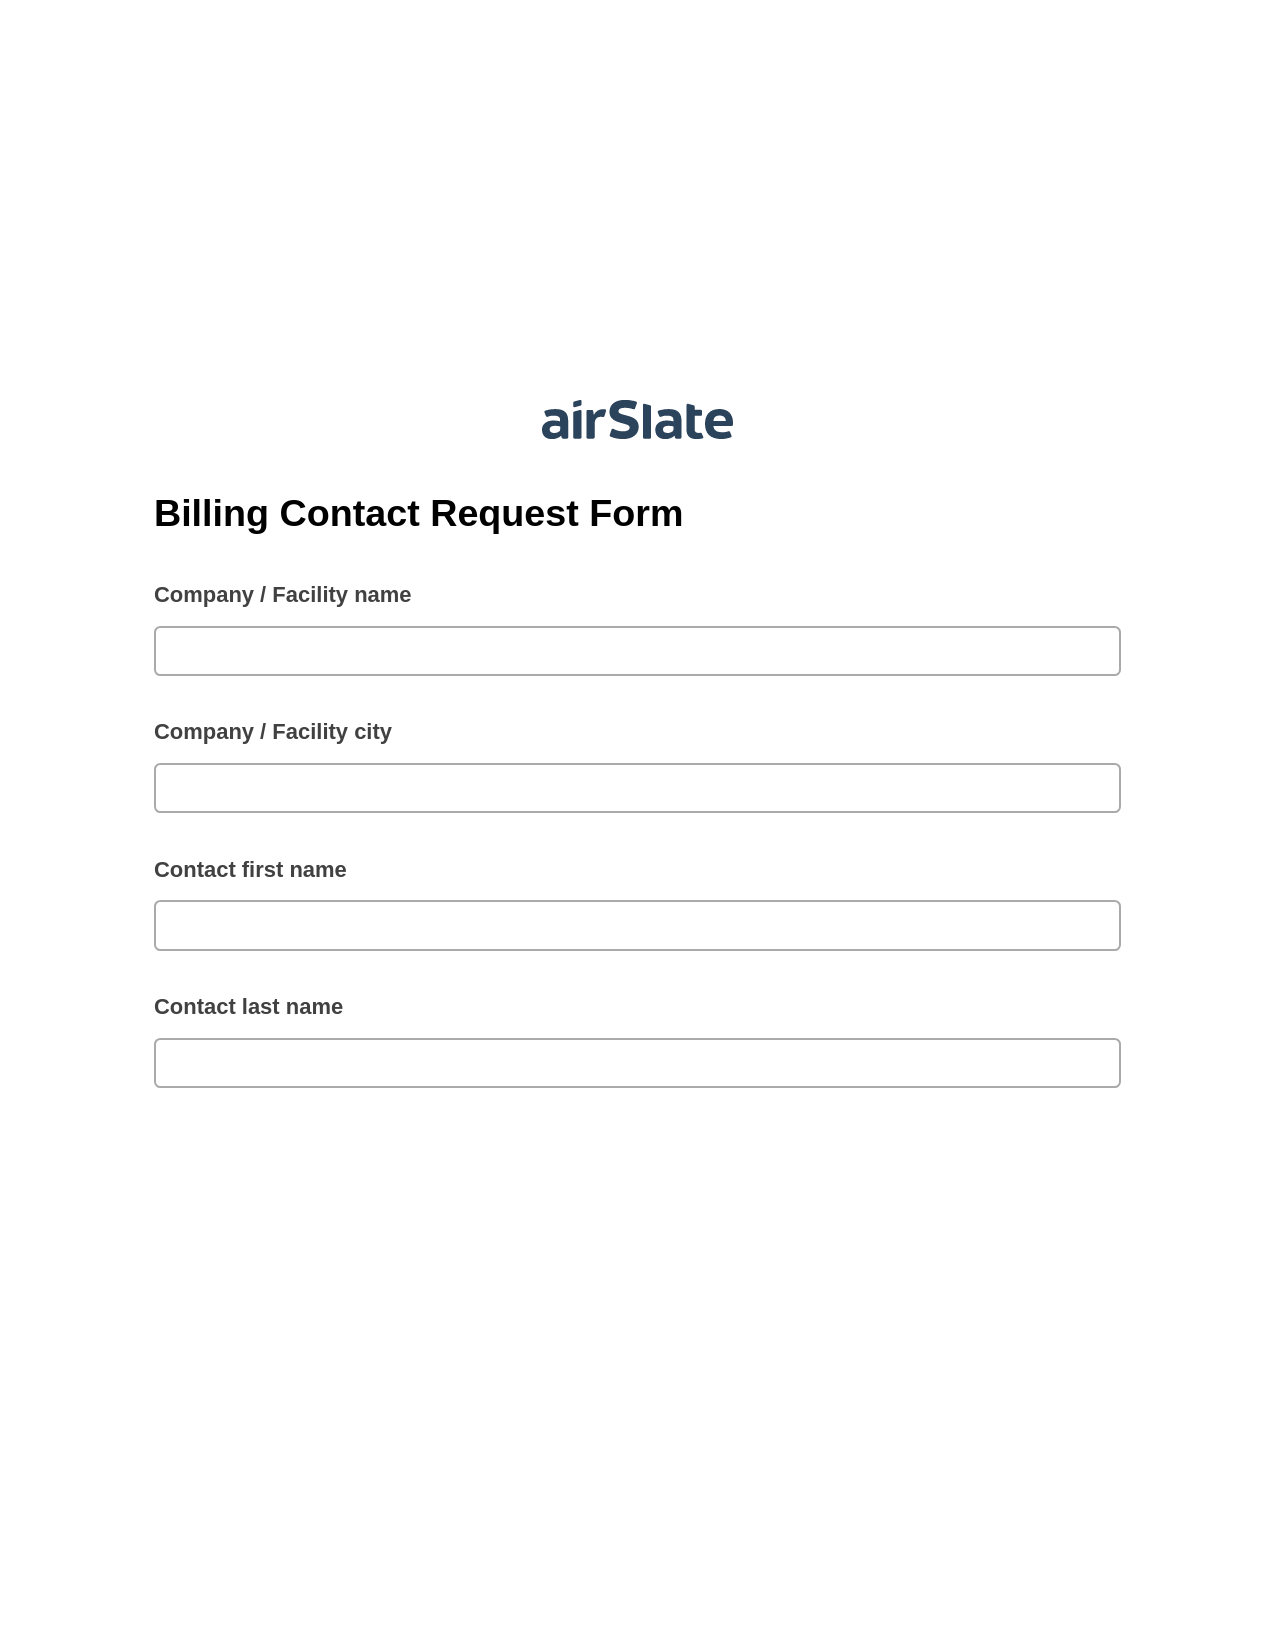 Multirole Billing Contact Request Form Pre-fill from Salesforce Record Bot, Google Cloud Print Bot, Box Bot